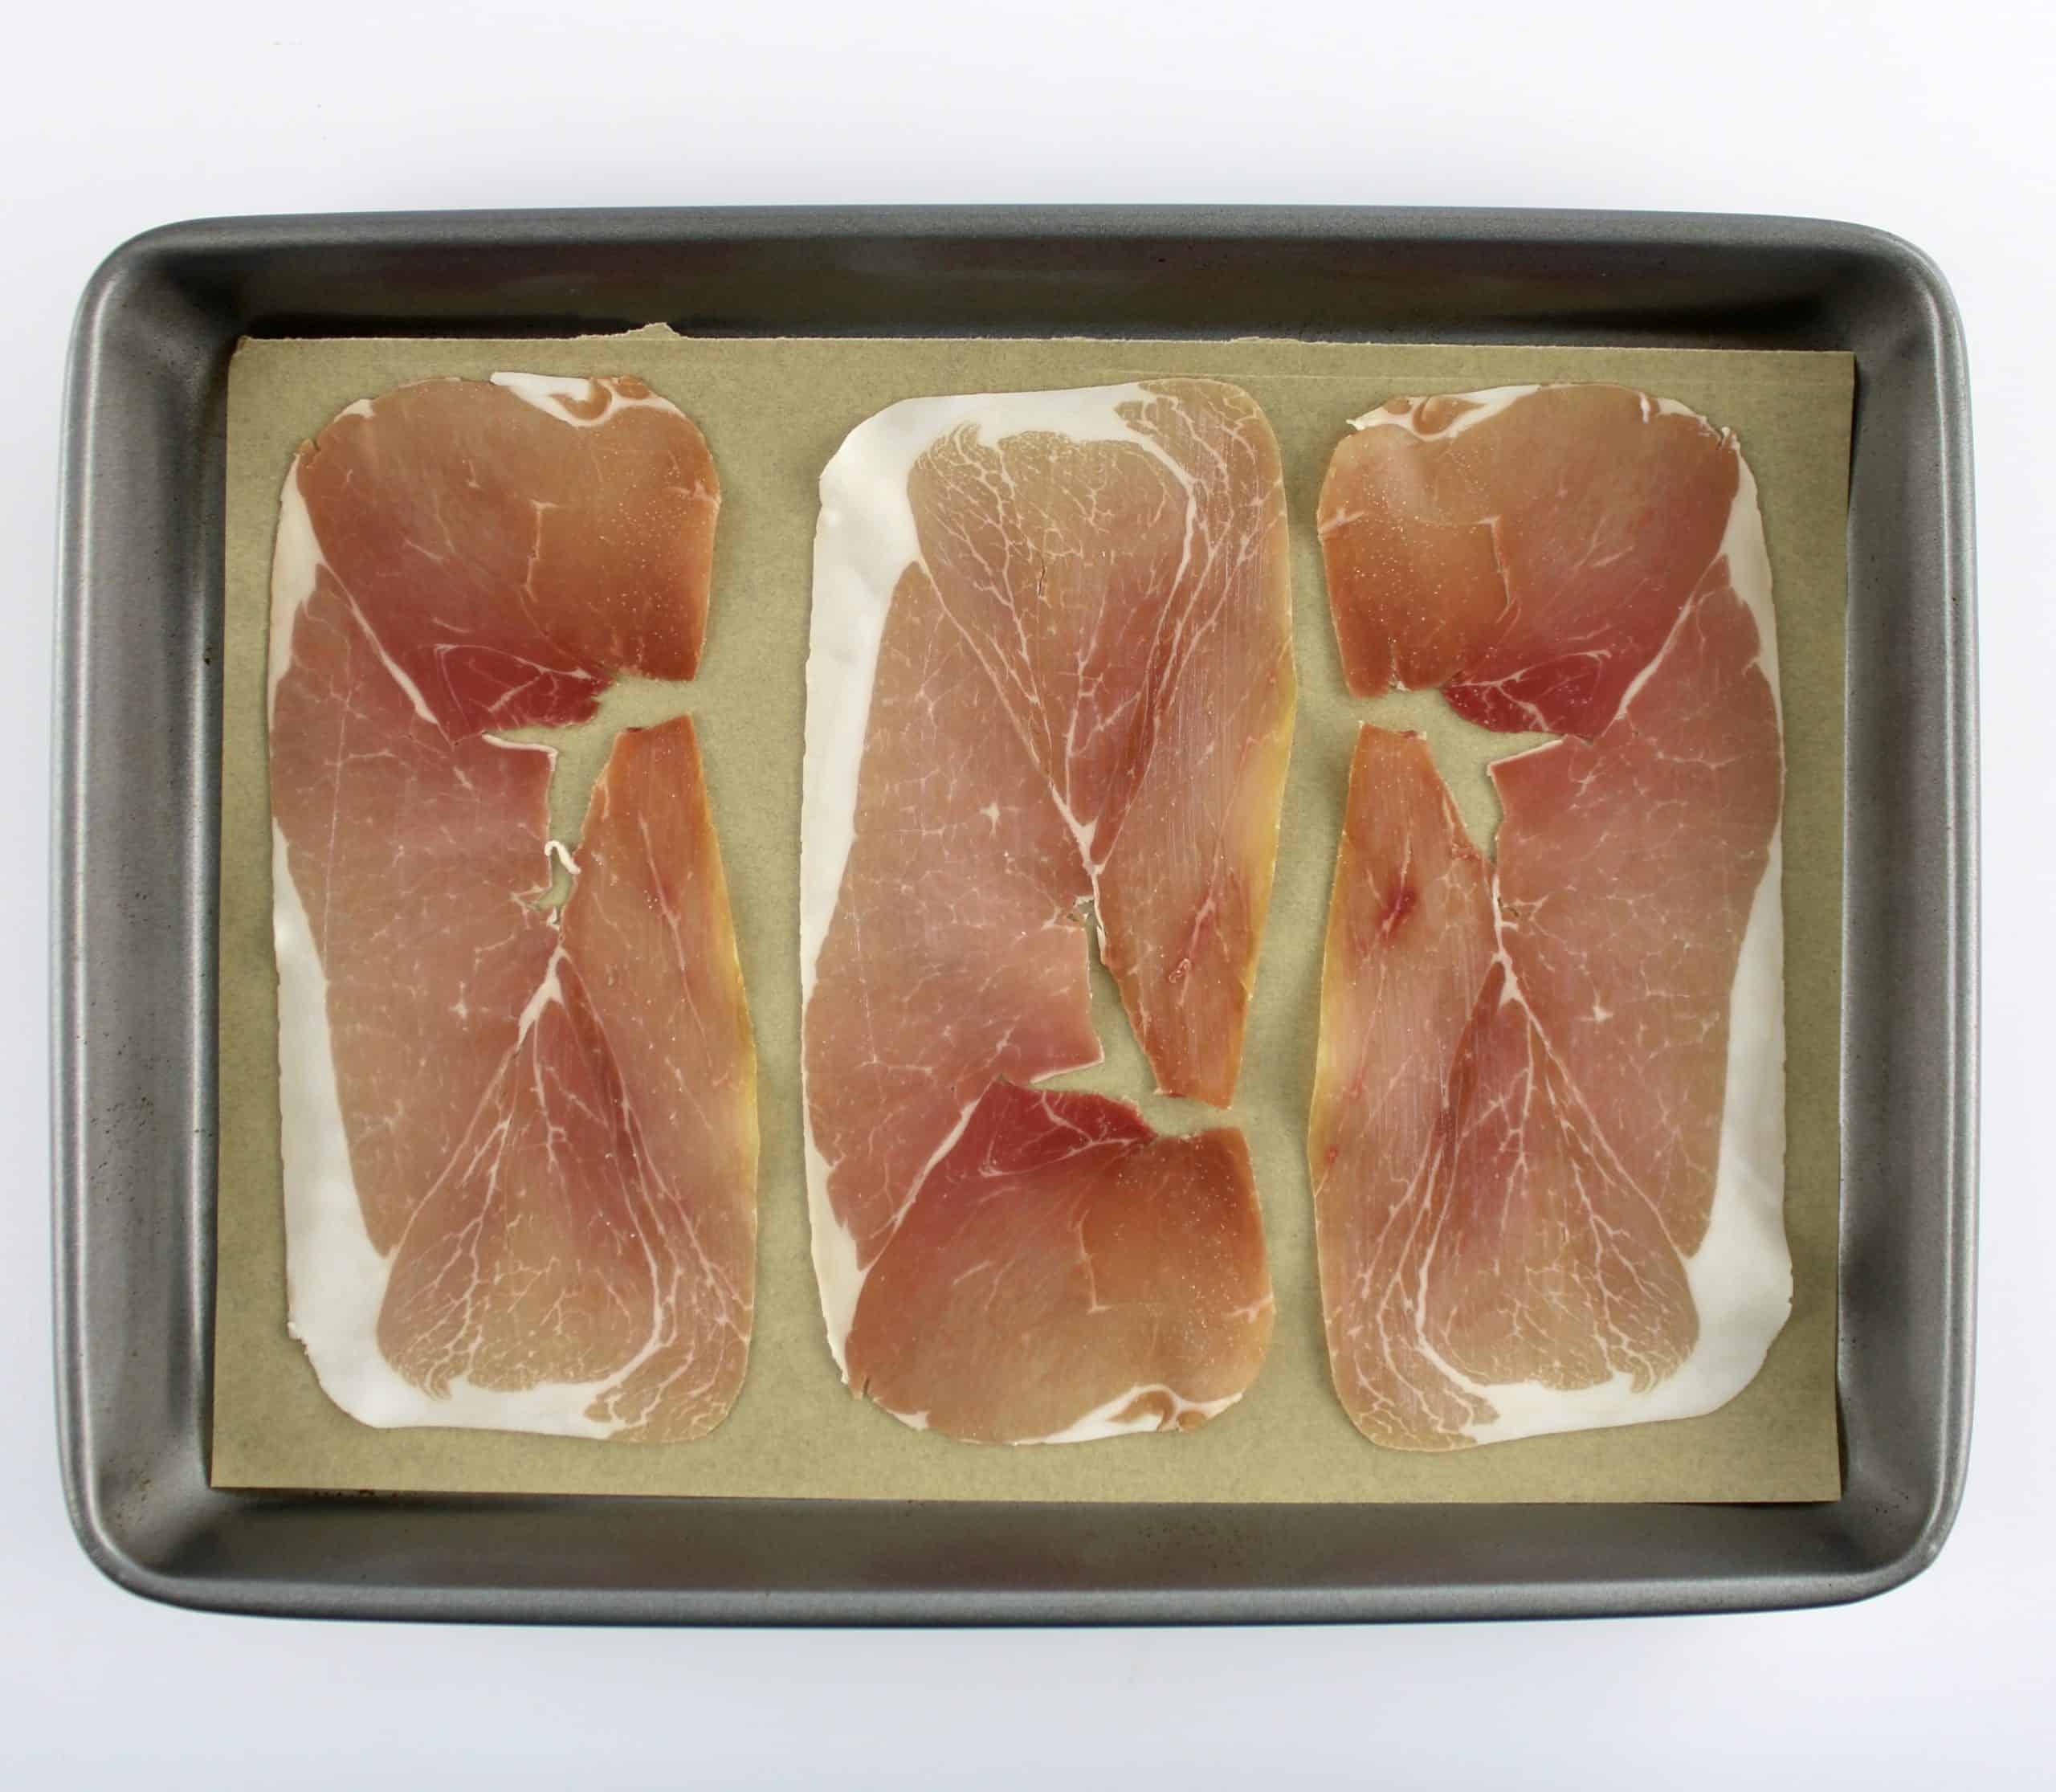 3 pieces of Prosciutto on sheetpan